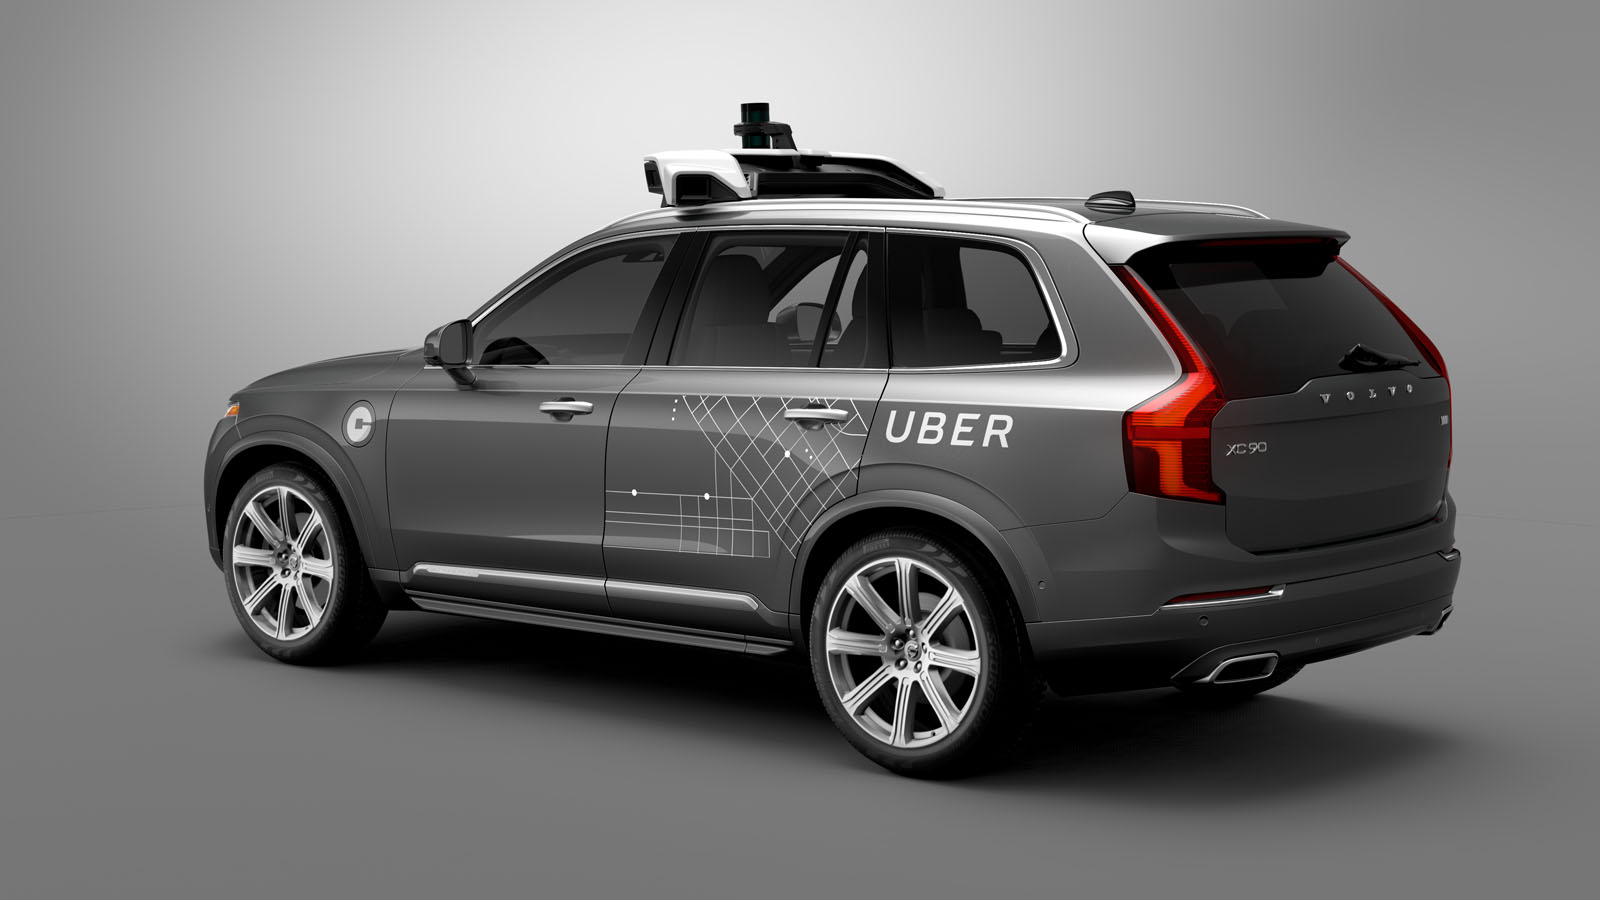 194845_volvo_cars_an_uber_join_forces_to_develop_autonomous_driving_cars_2 taciki.ru